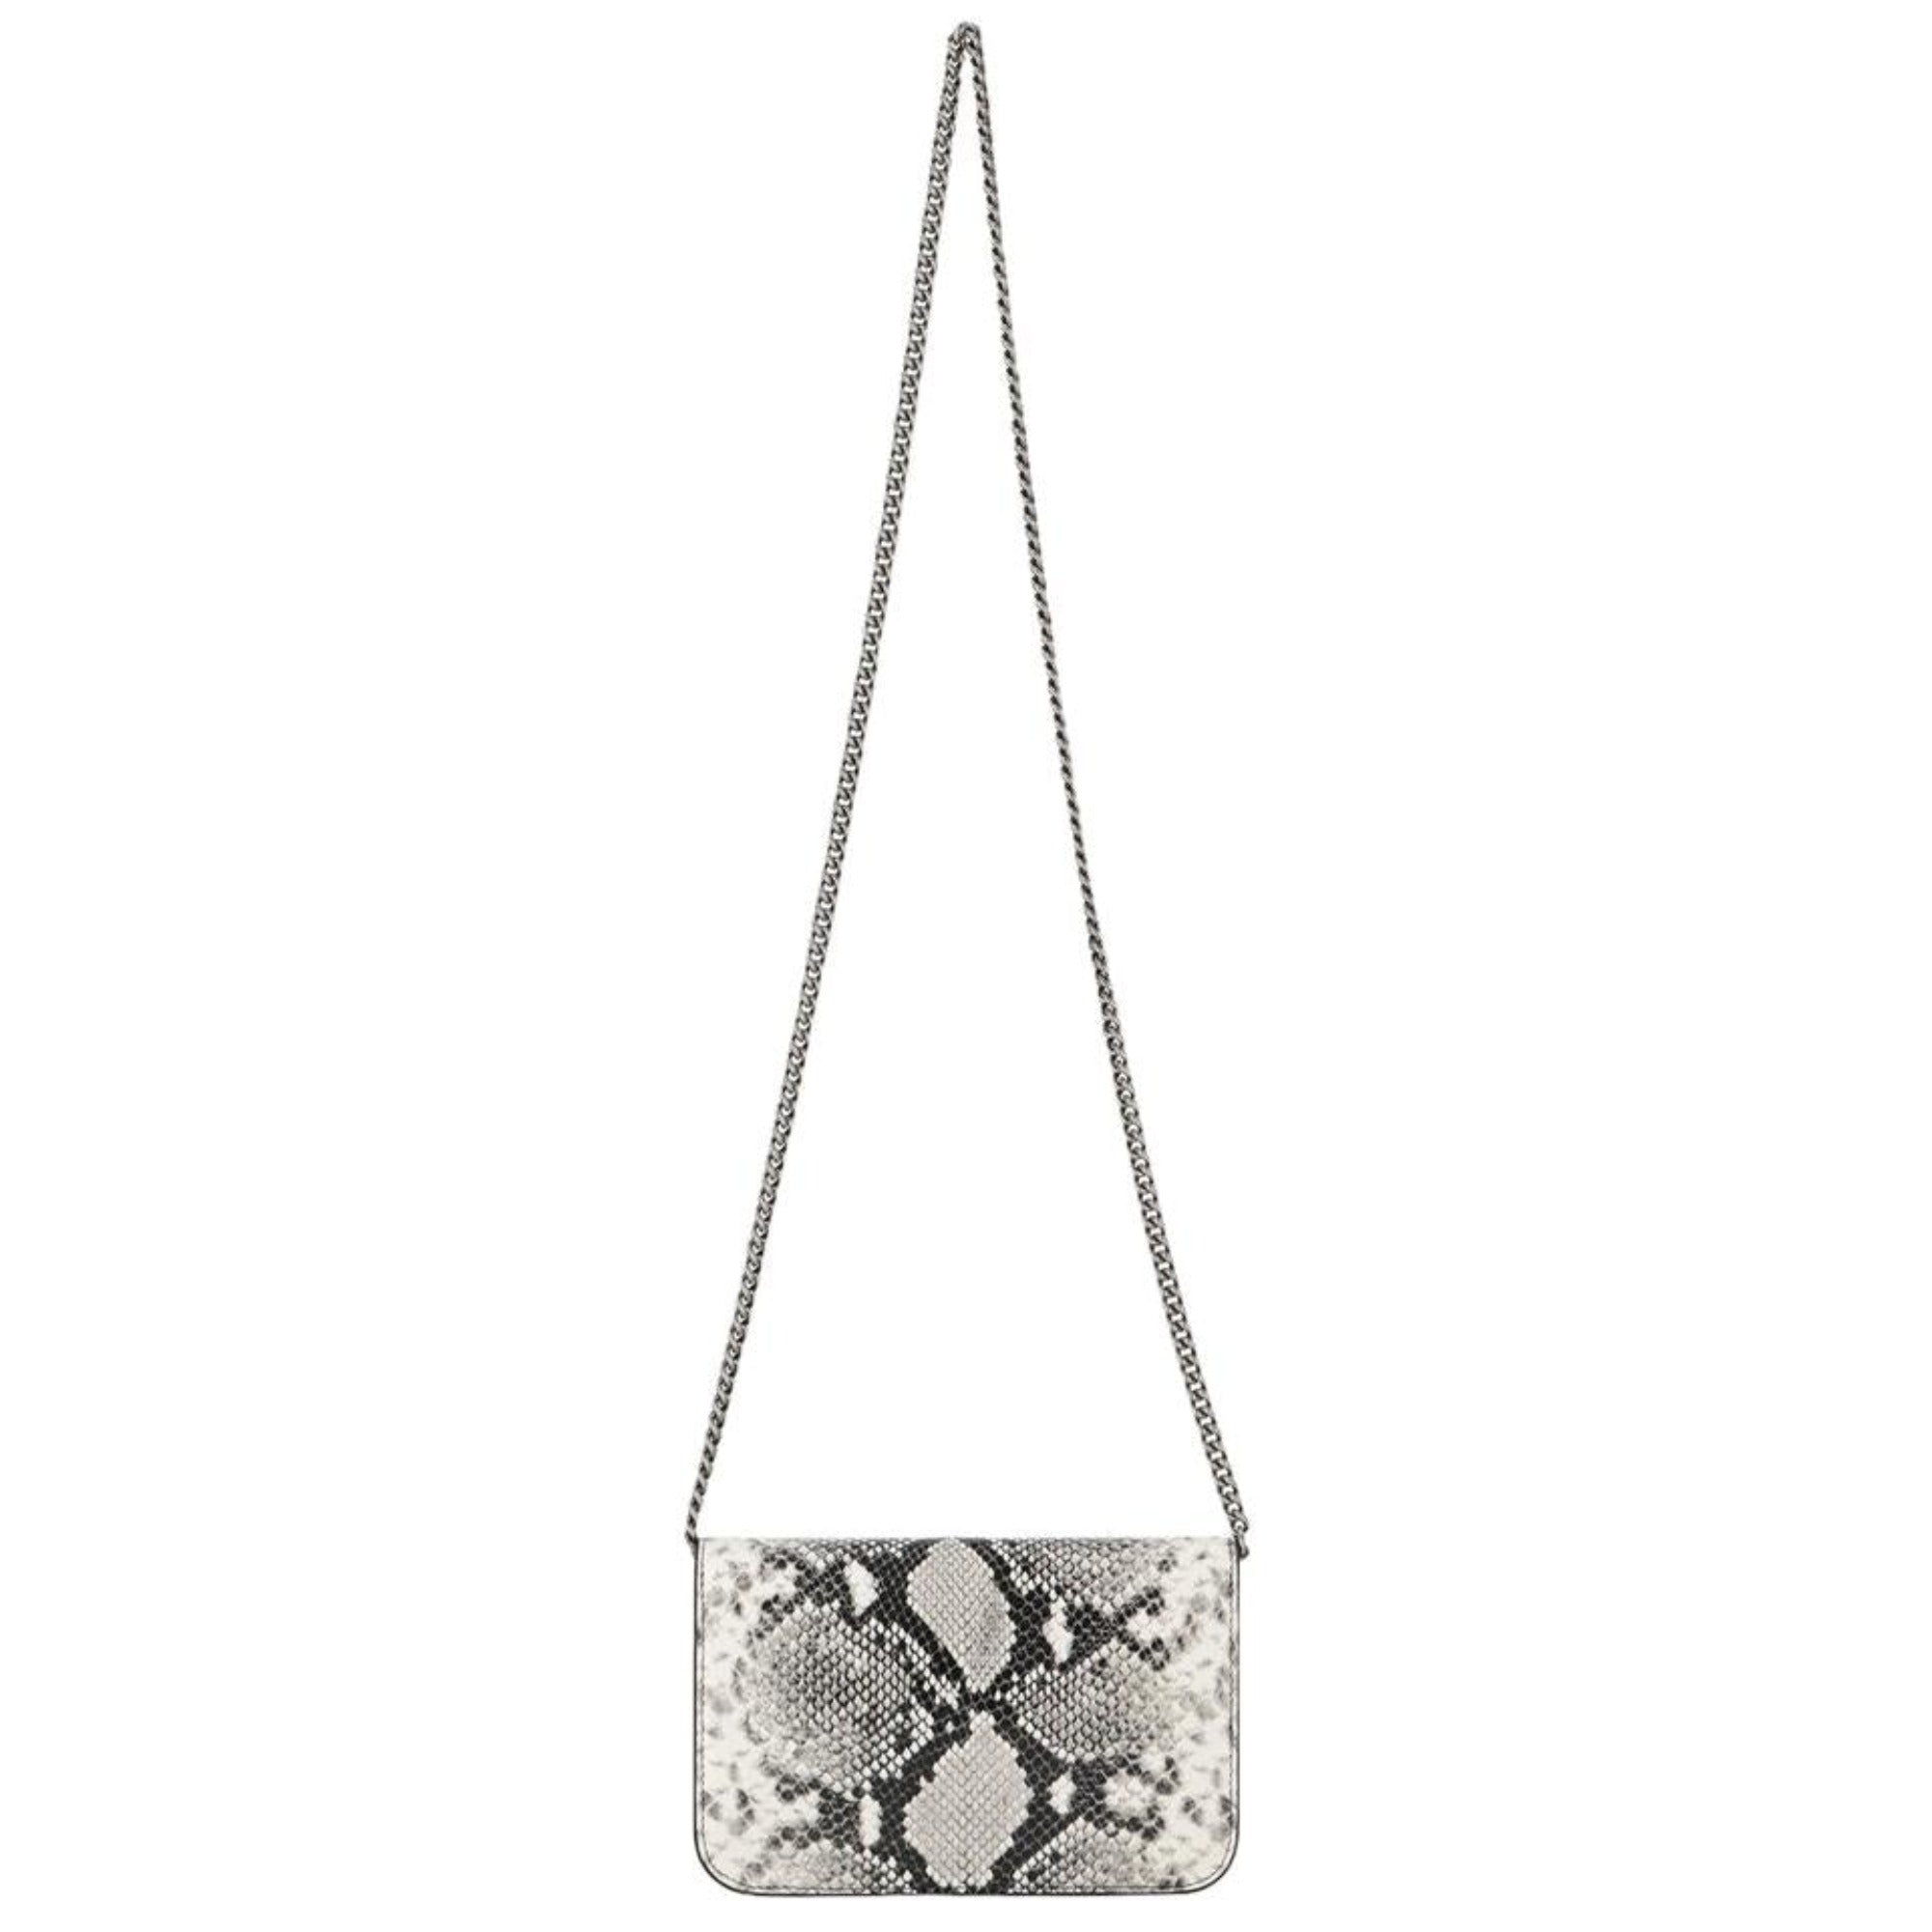 Balenciaga B Python Print Calfskin Leather Wallet on Chain Bag 593615 at_Queen_Bee_of_Beverly_Hills